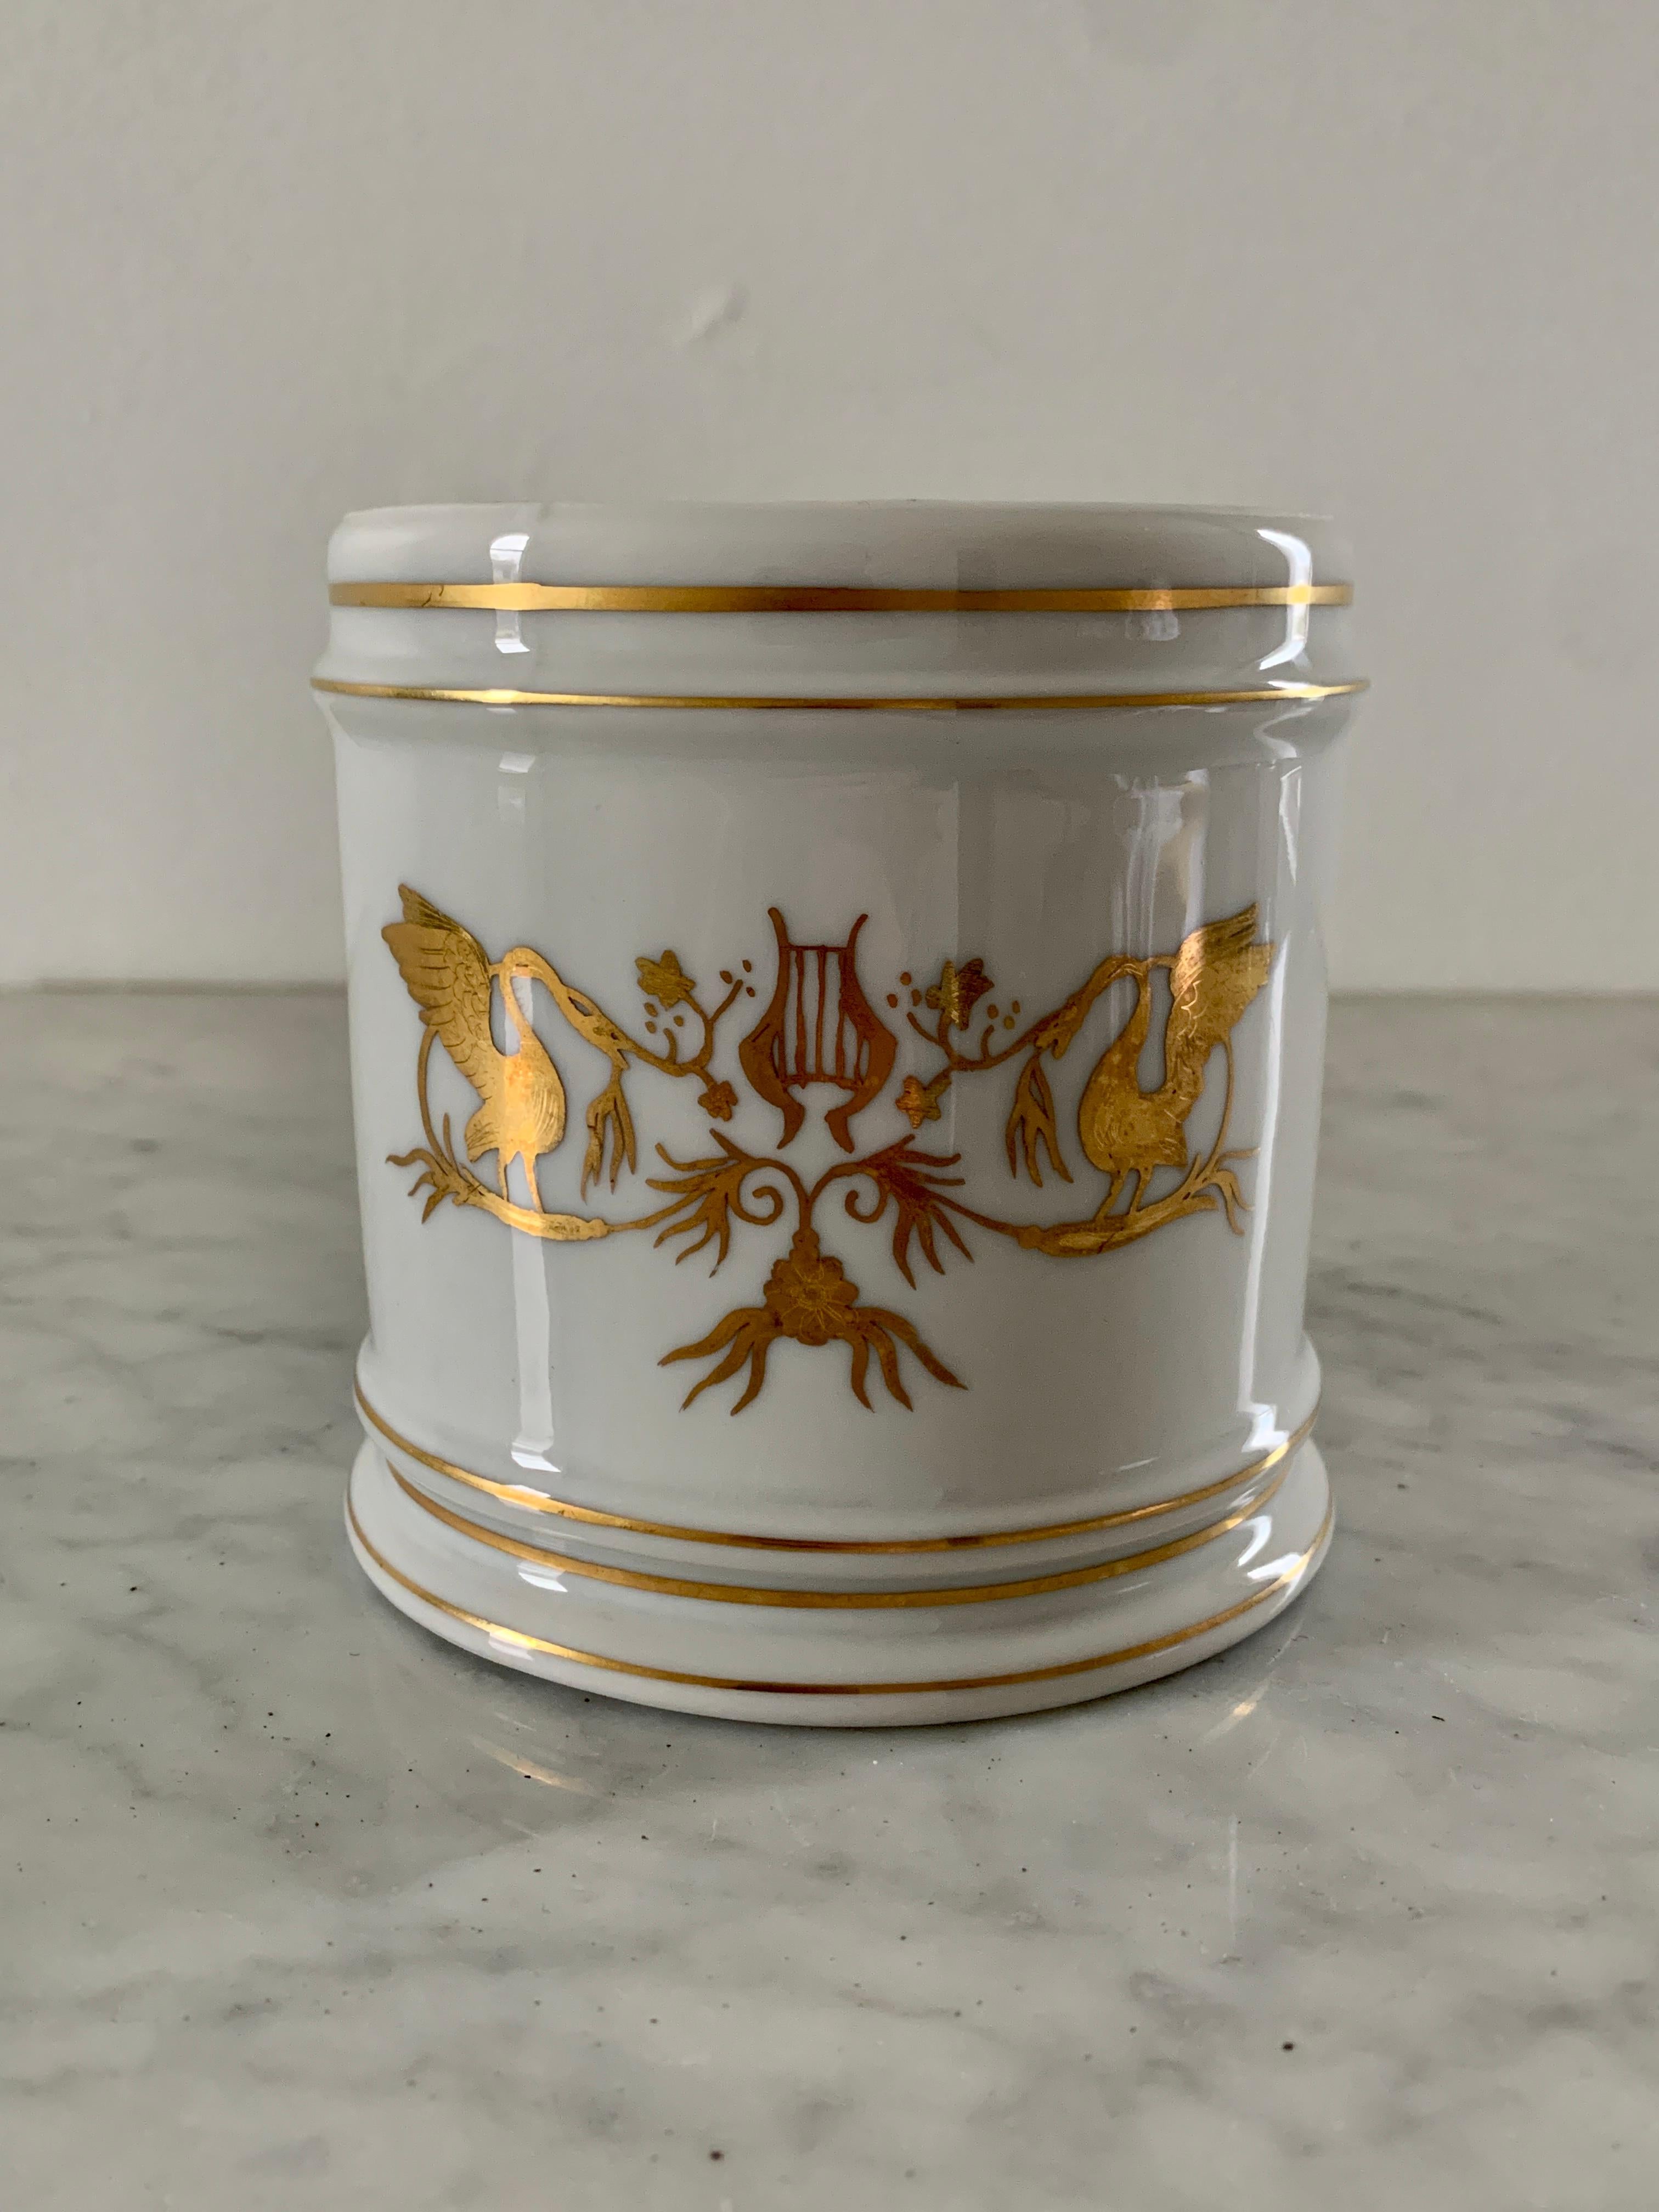 Regency French Neoclassical Porcelain Cachepot by Limoges